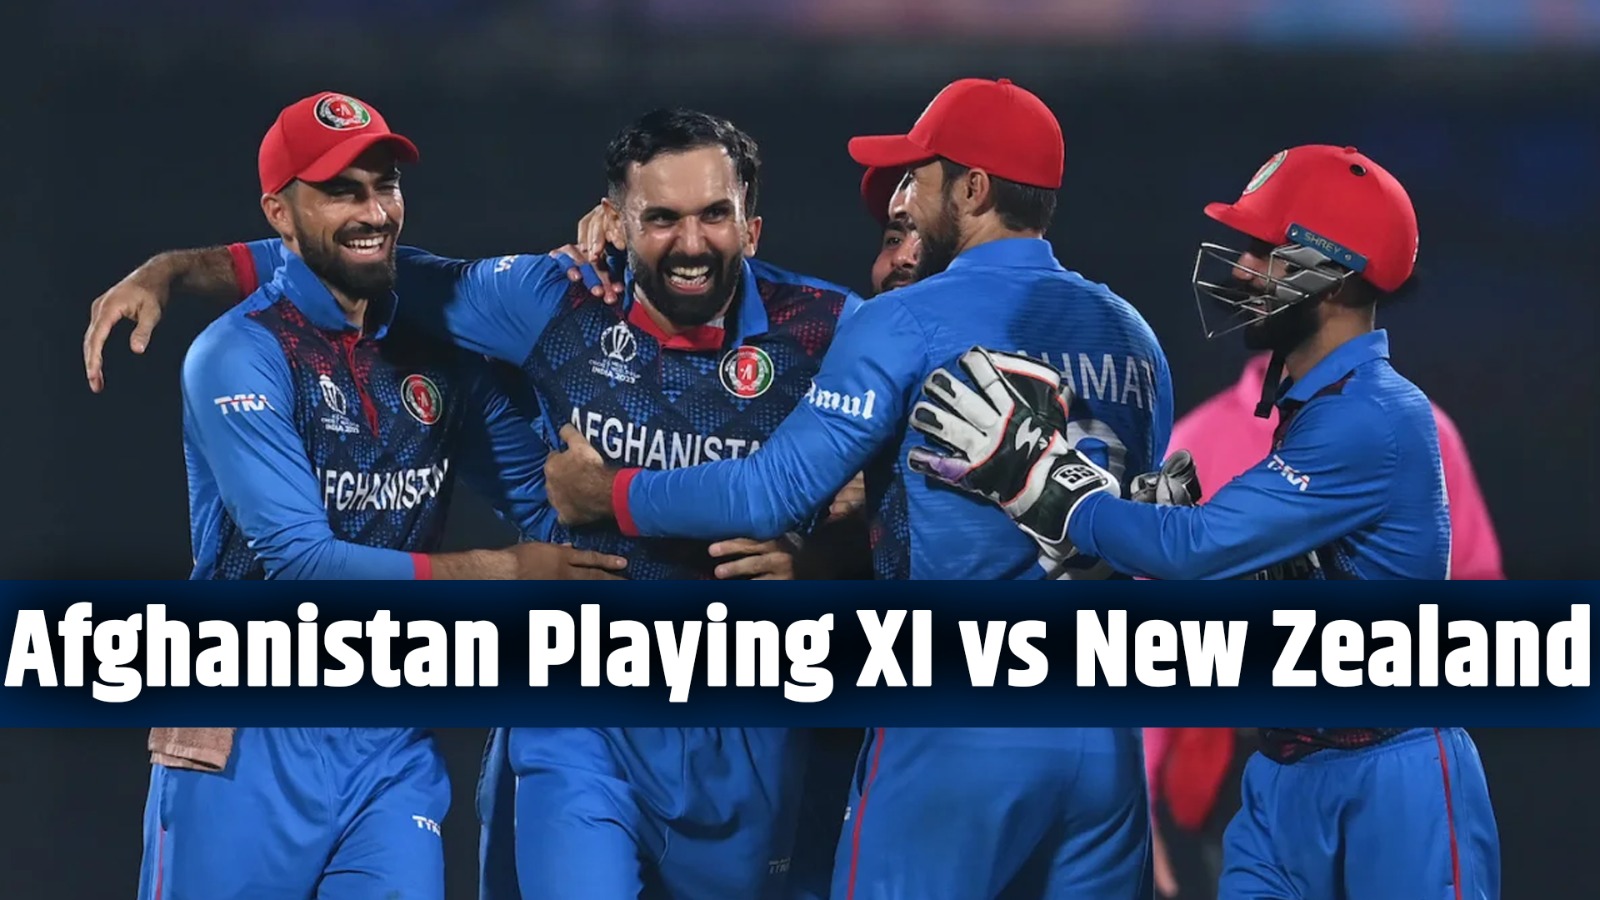 AFG Playing XI Against NZ: Afghanistan Playing XI Against New Zealand, Match No. 16, ICC Cricket World Cup 2023